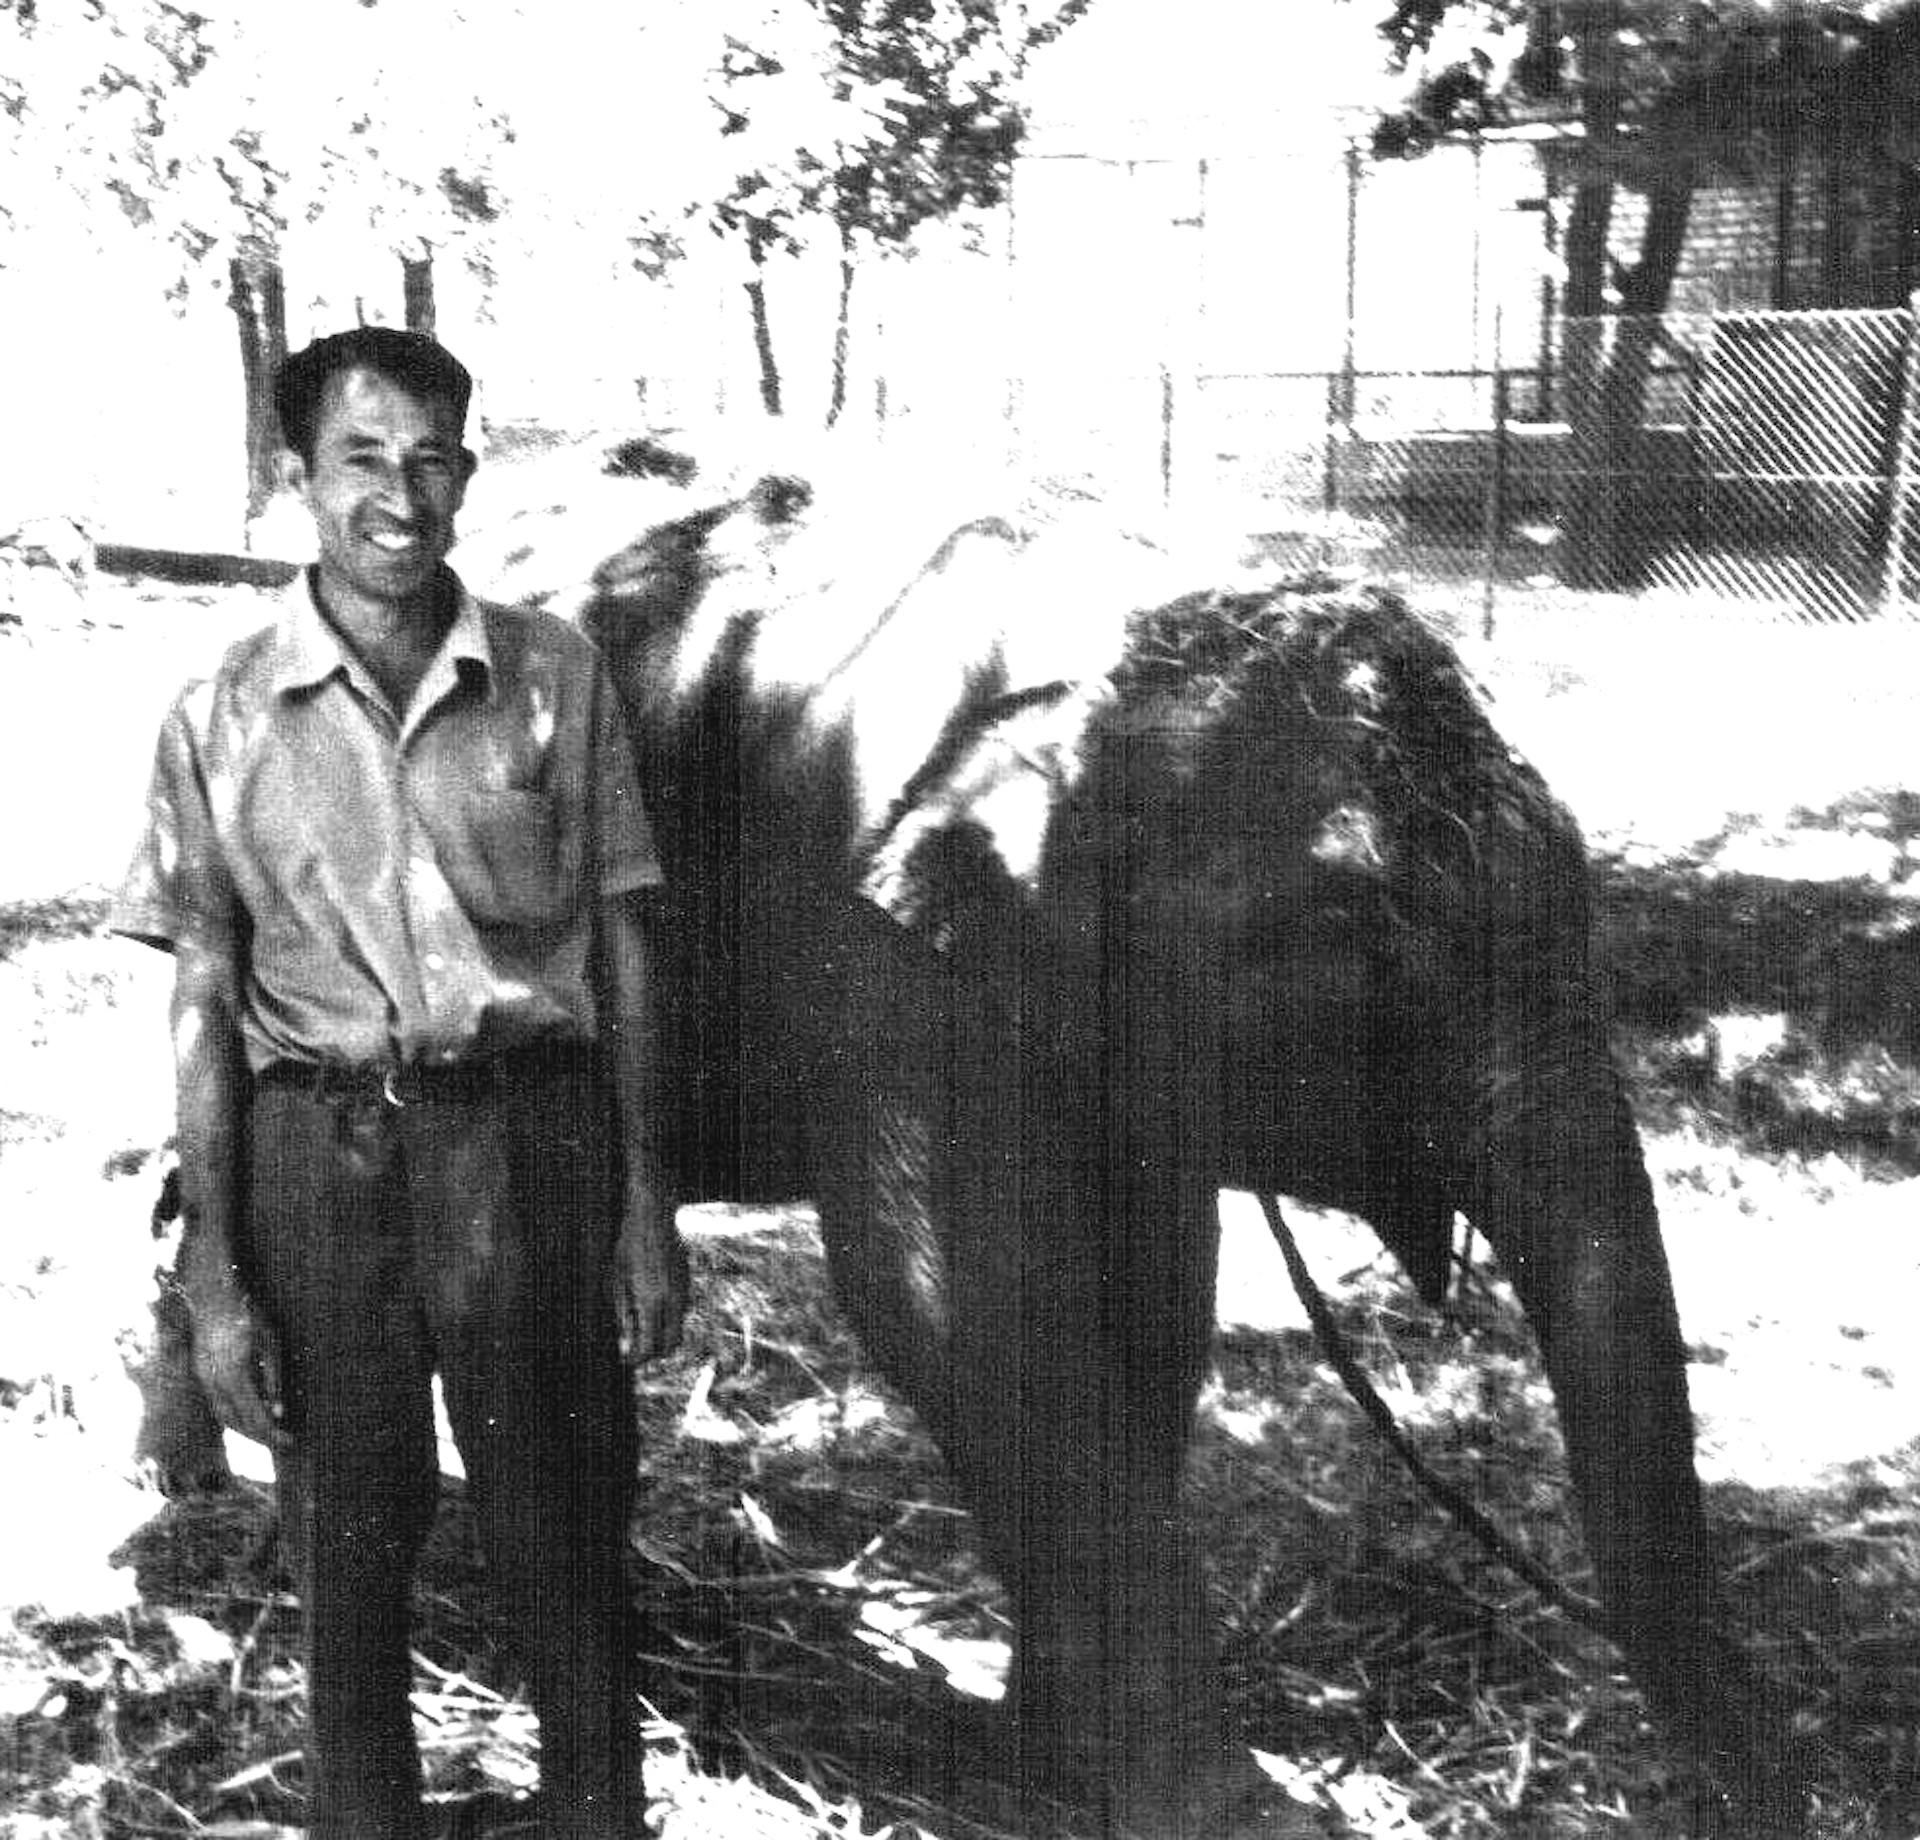 Shehr Mohammad, Gunther Nogge’s friend, posing with Hathi. Courtesy: Gunther Nogge 